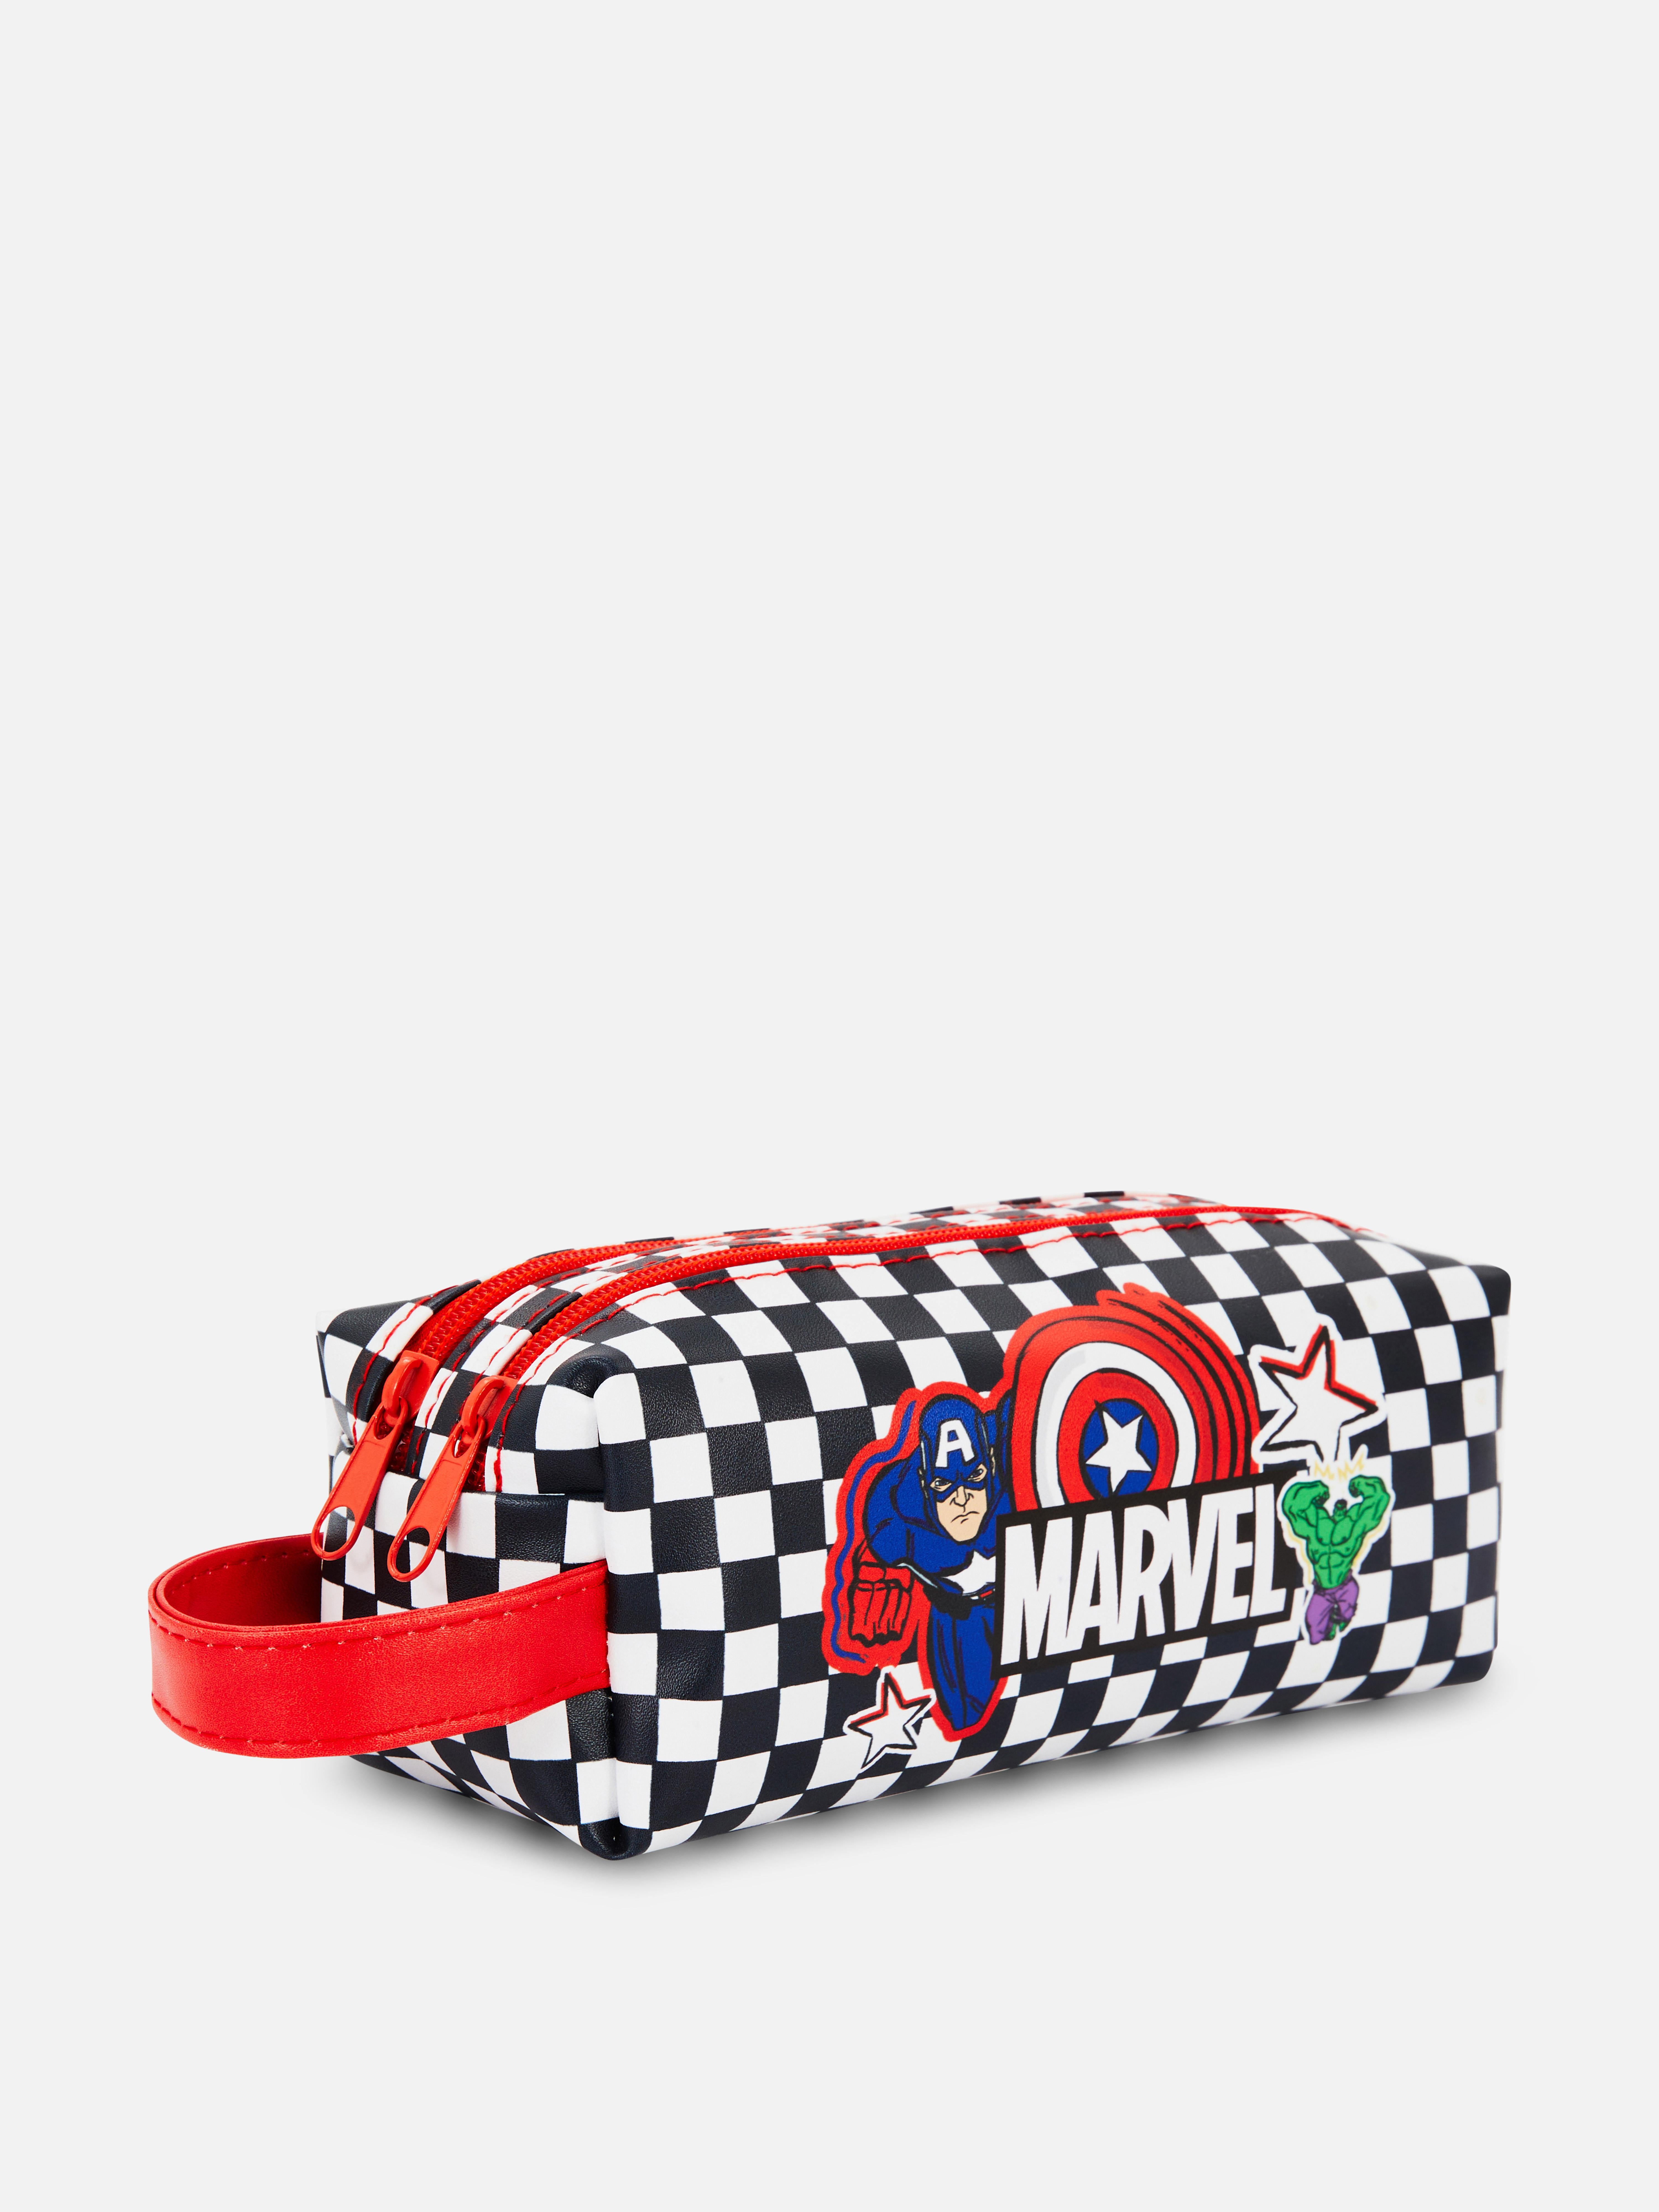 Marvel Avengers Chequered Pencil Case